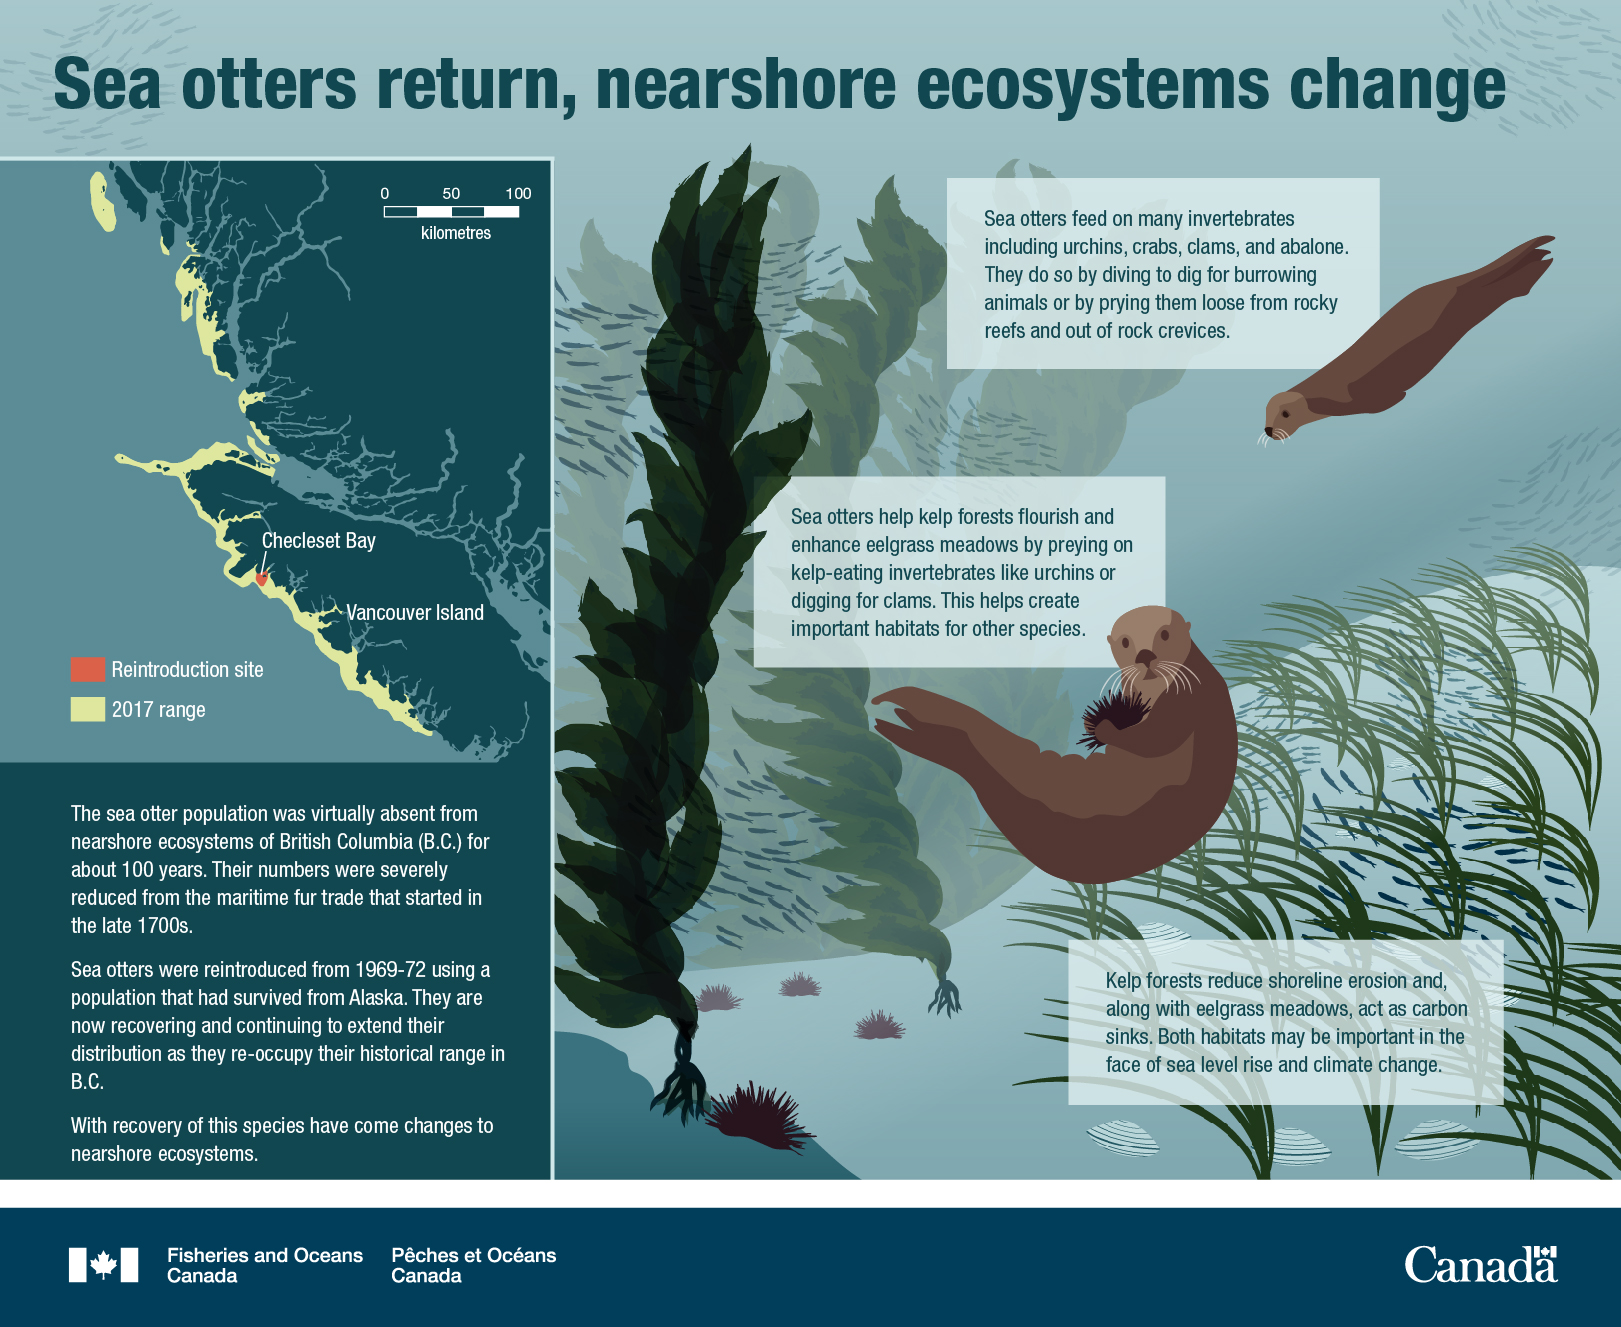 Canada’s Oceans Now, Pacific Ecosystems 2021 - Sea otters return, nearshore ecosystems change